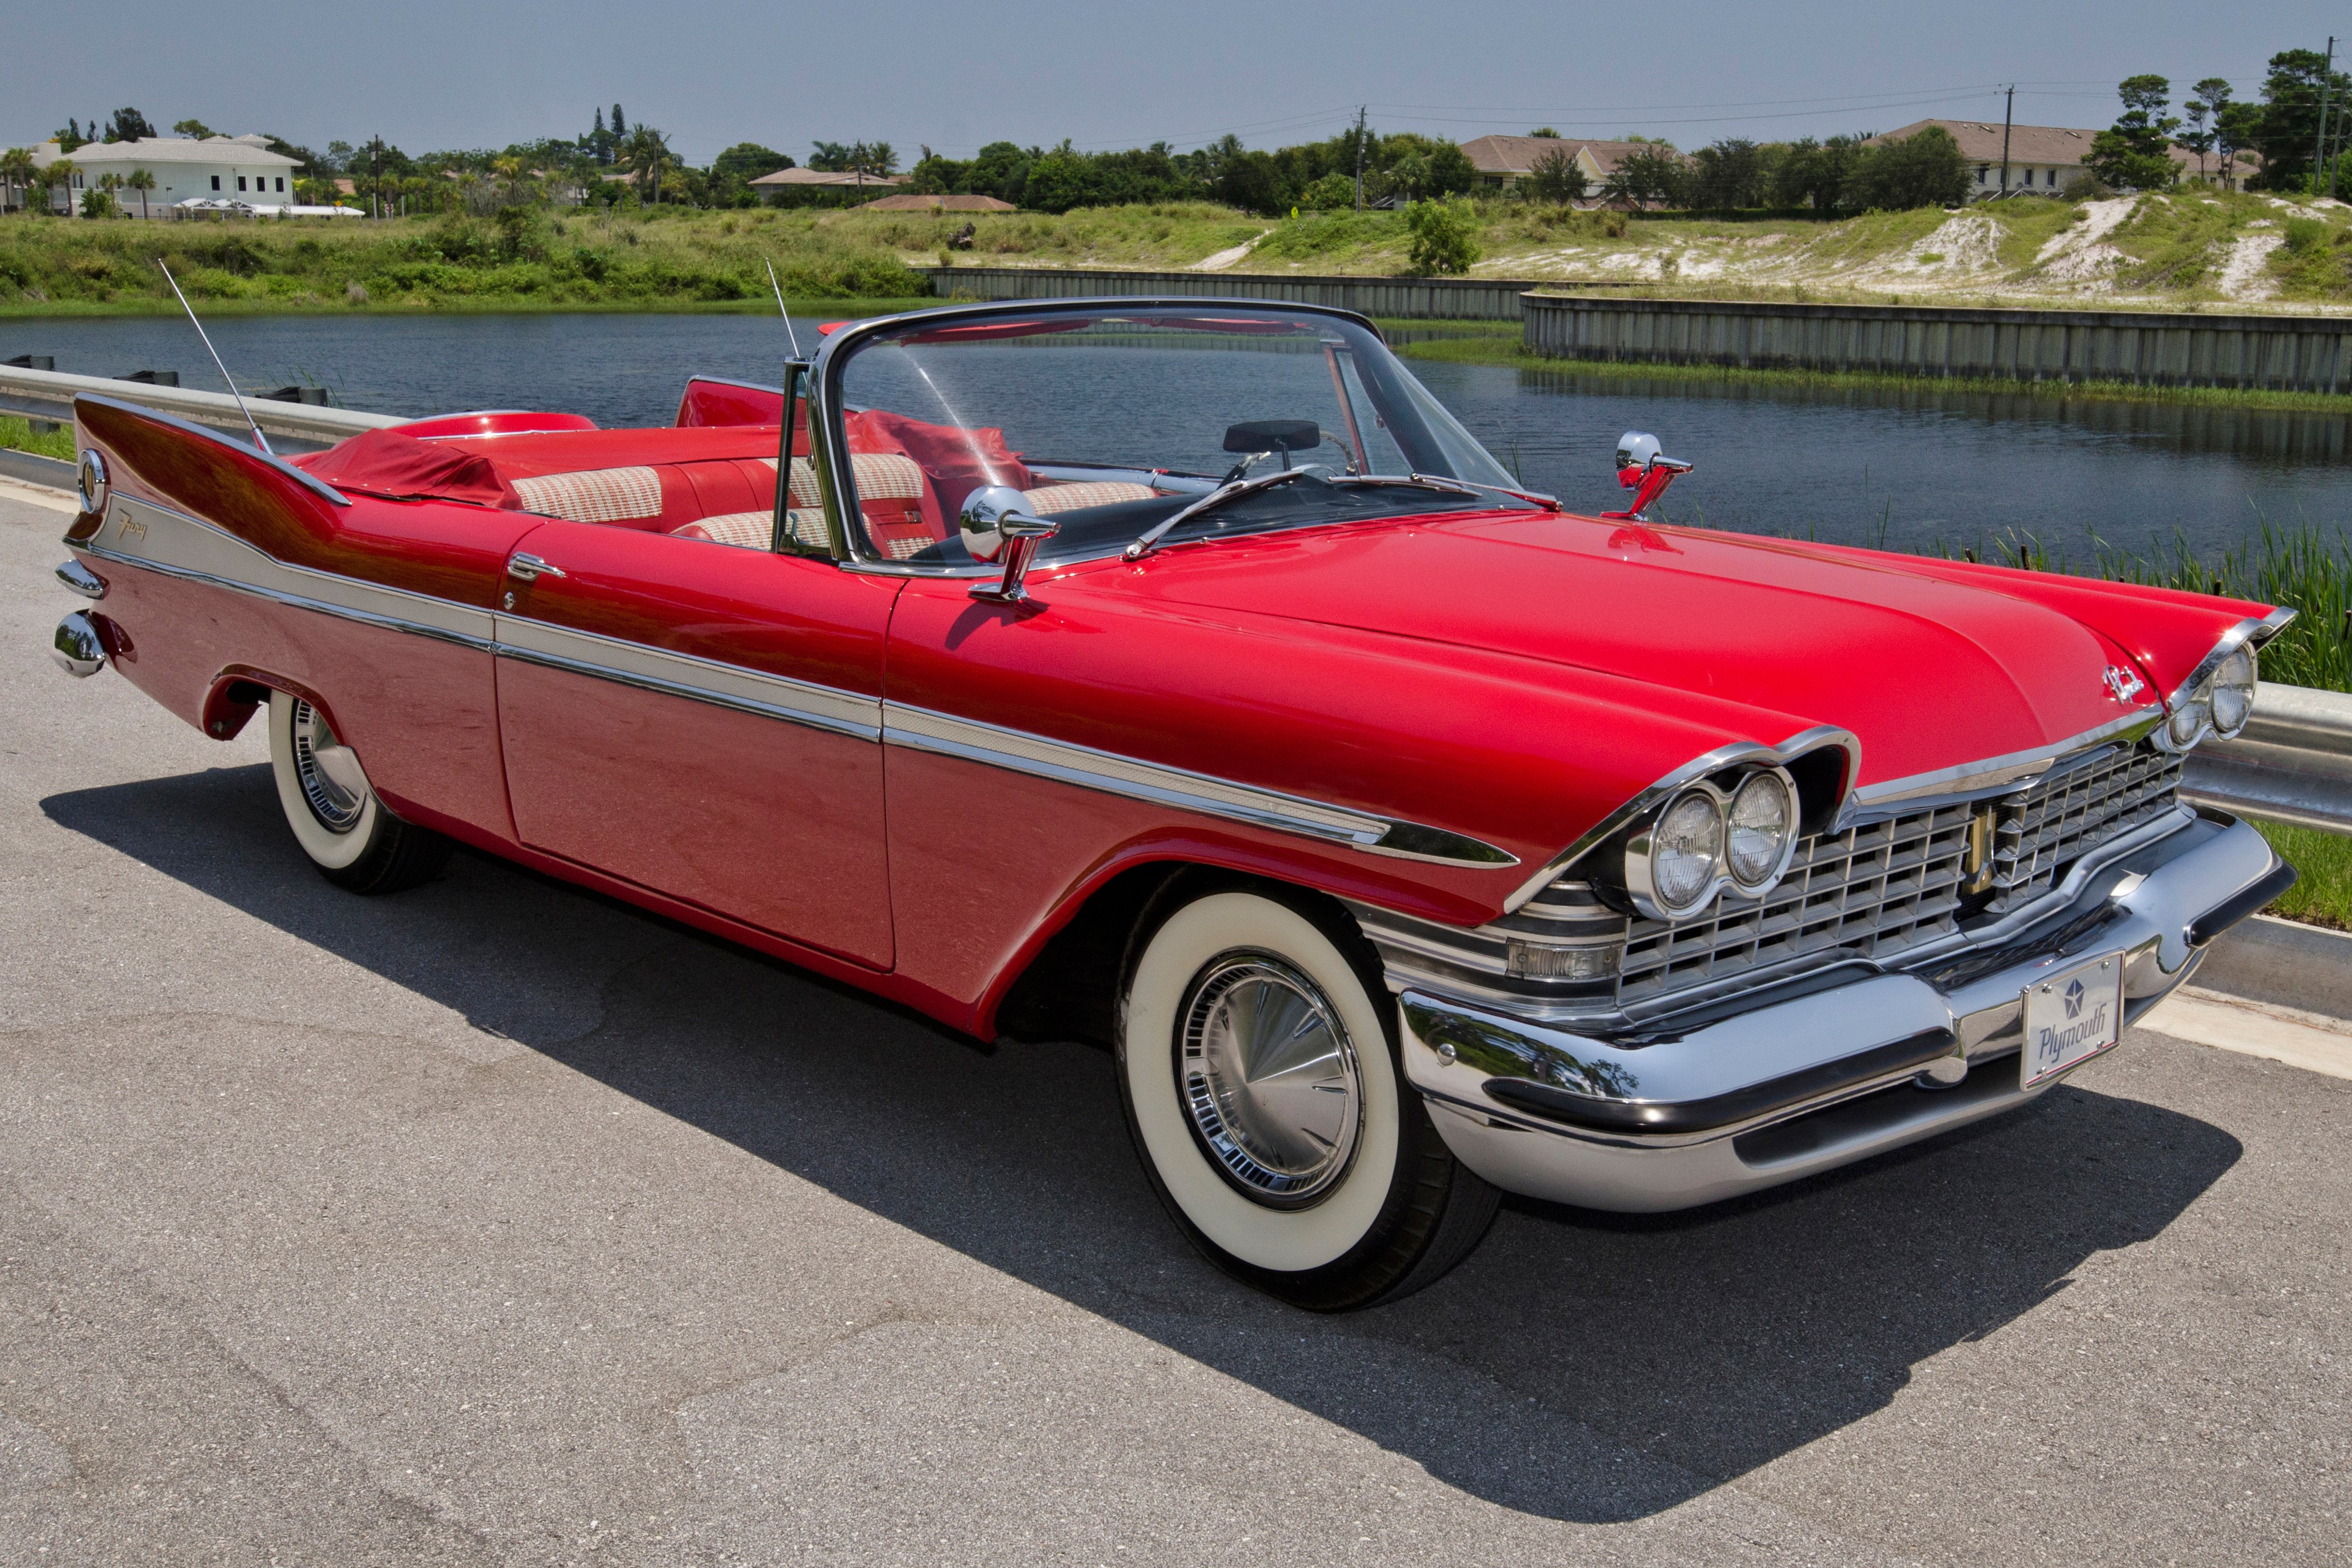 1959, Plymouth, Sport, Fury, Convertible, Classic, Red, Usa, Retro, Old, Usa, 4200x2800 01 Wallpaper